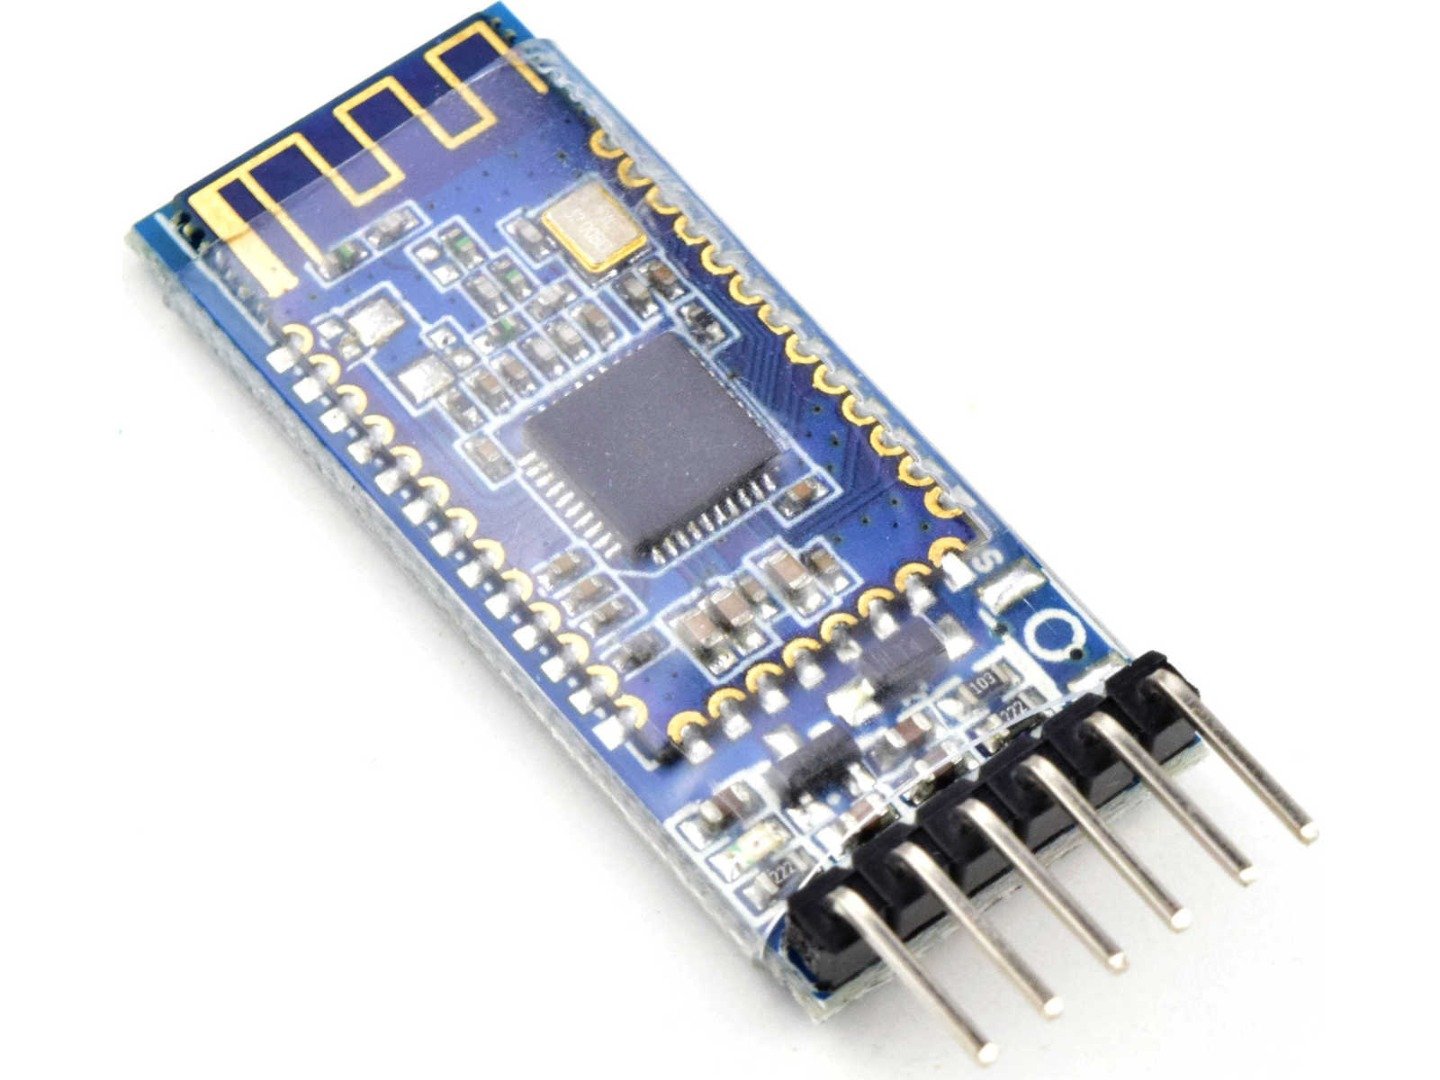 HM-10 Bluetooth 4.0 BLE Module with TI CC2541 chipset 6